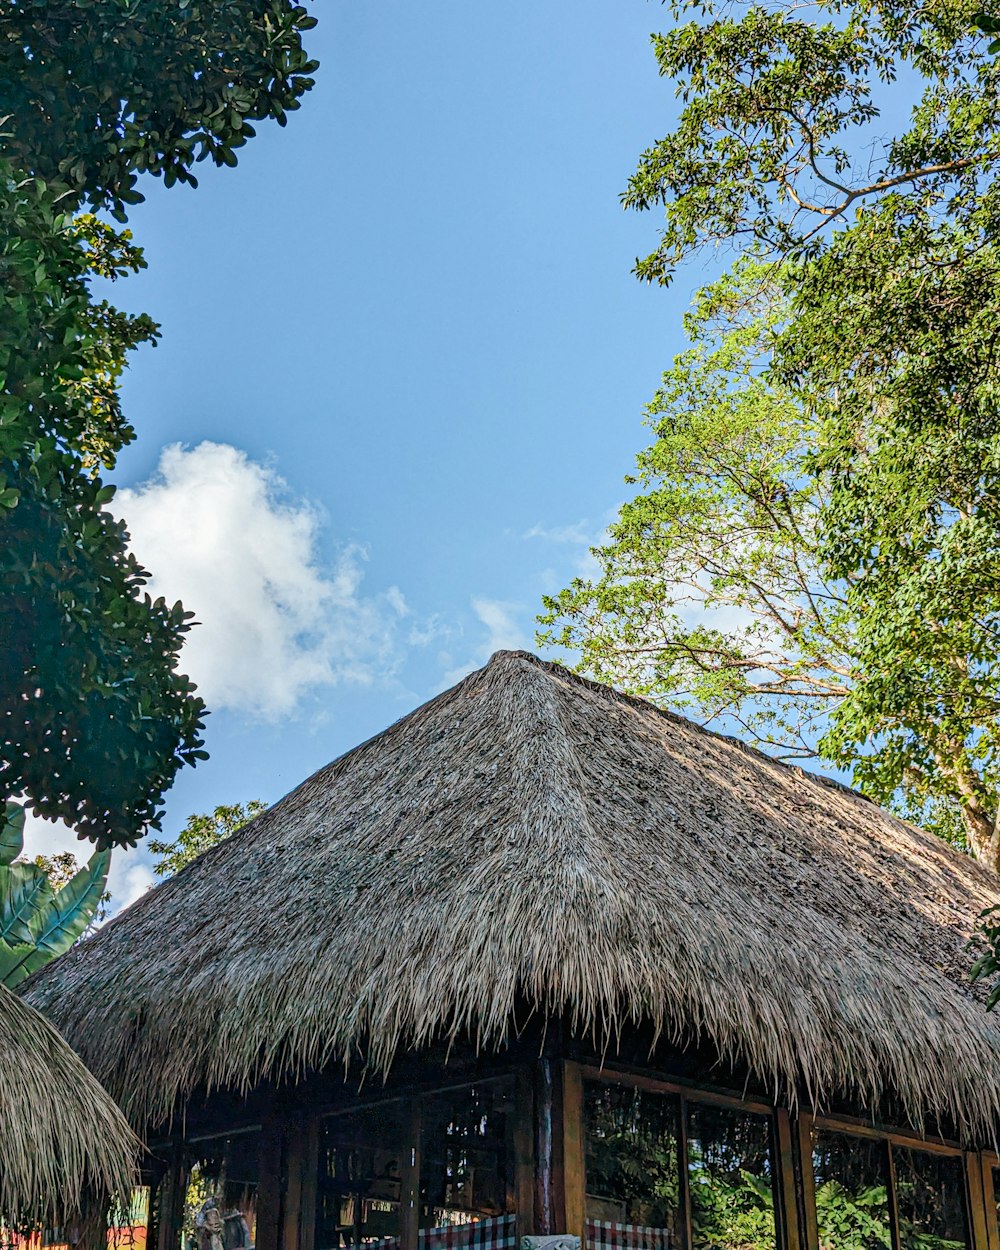 a hut with a thatched roof in a tropical setting